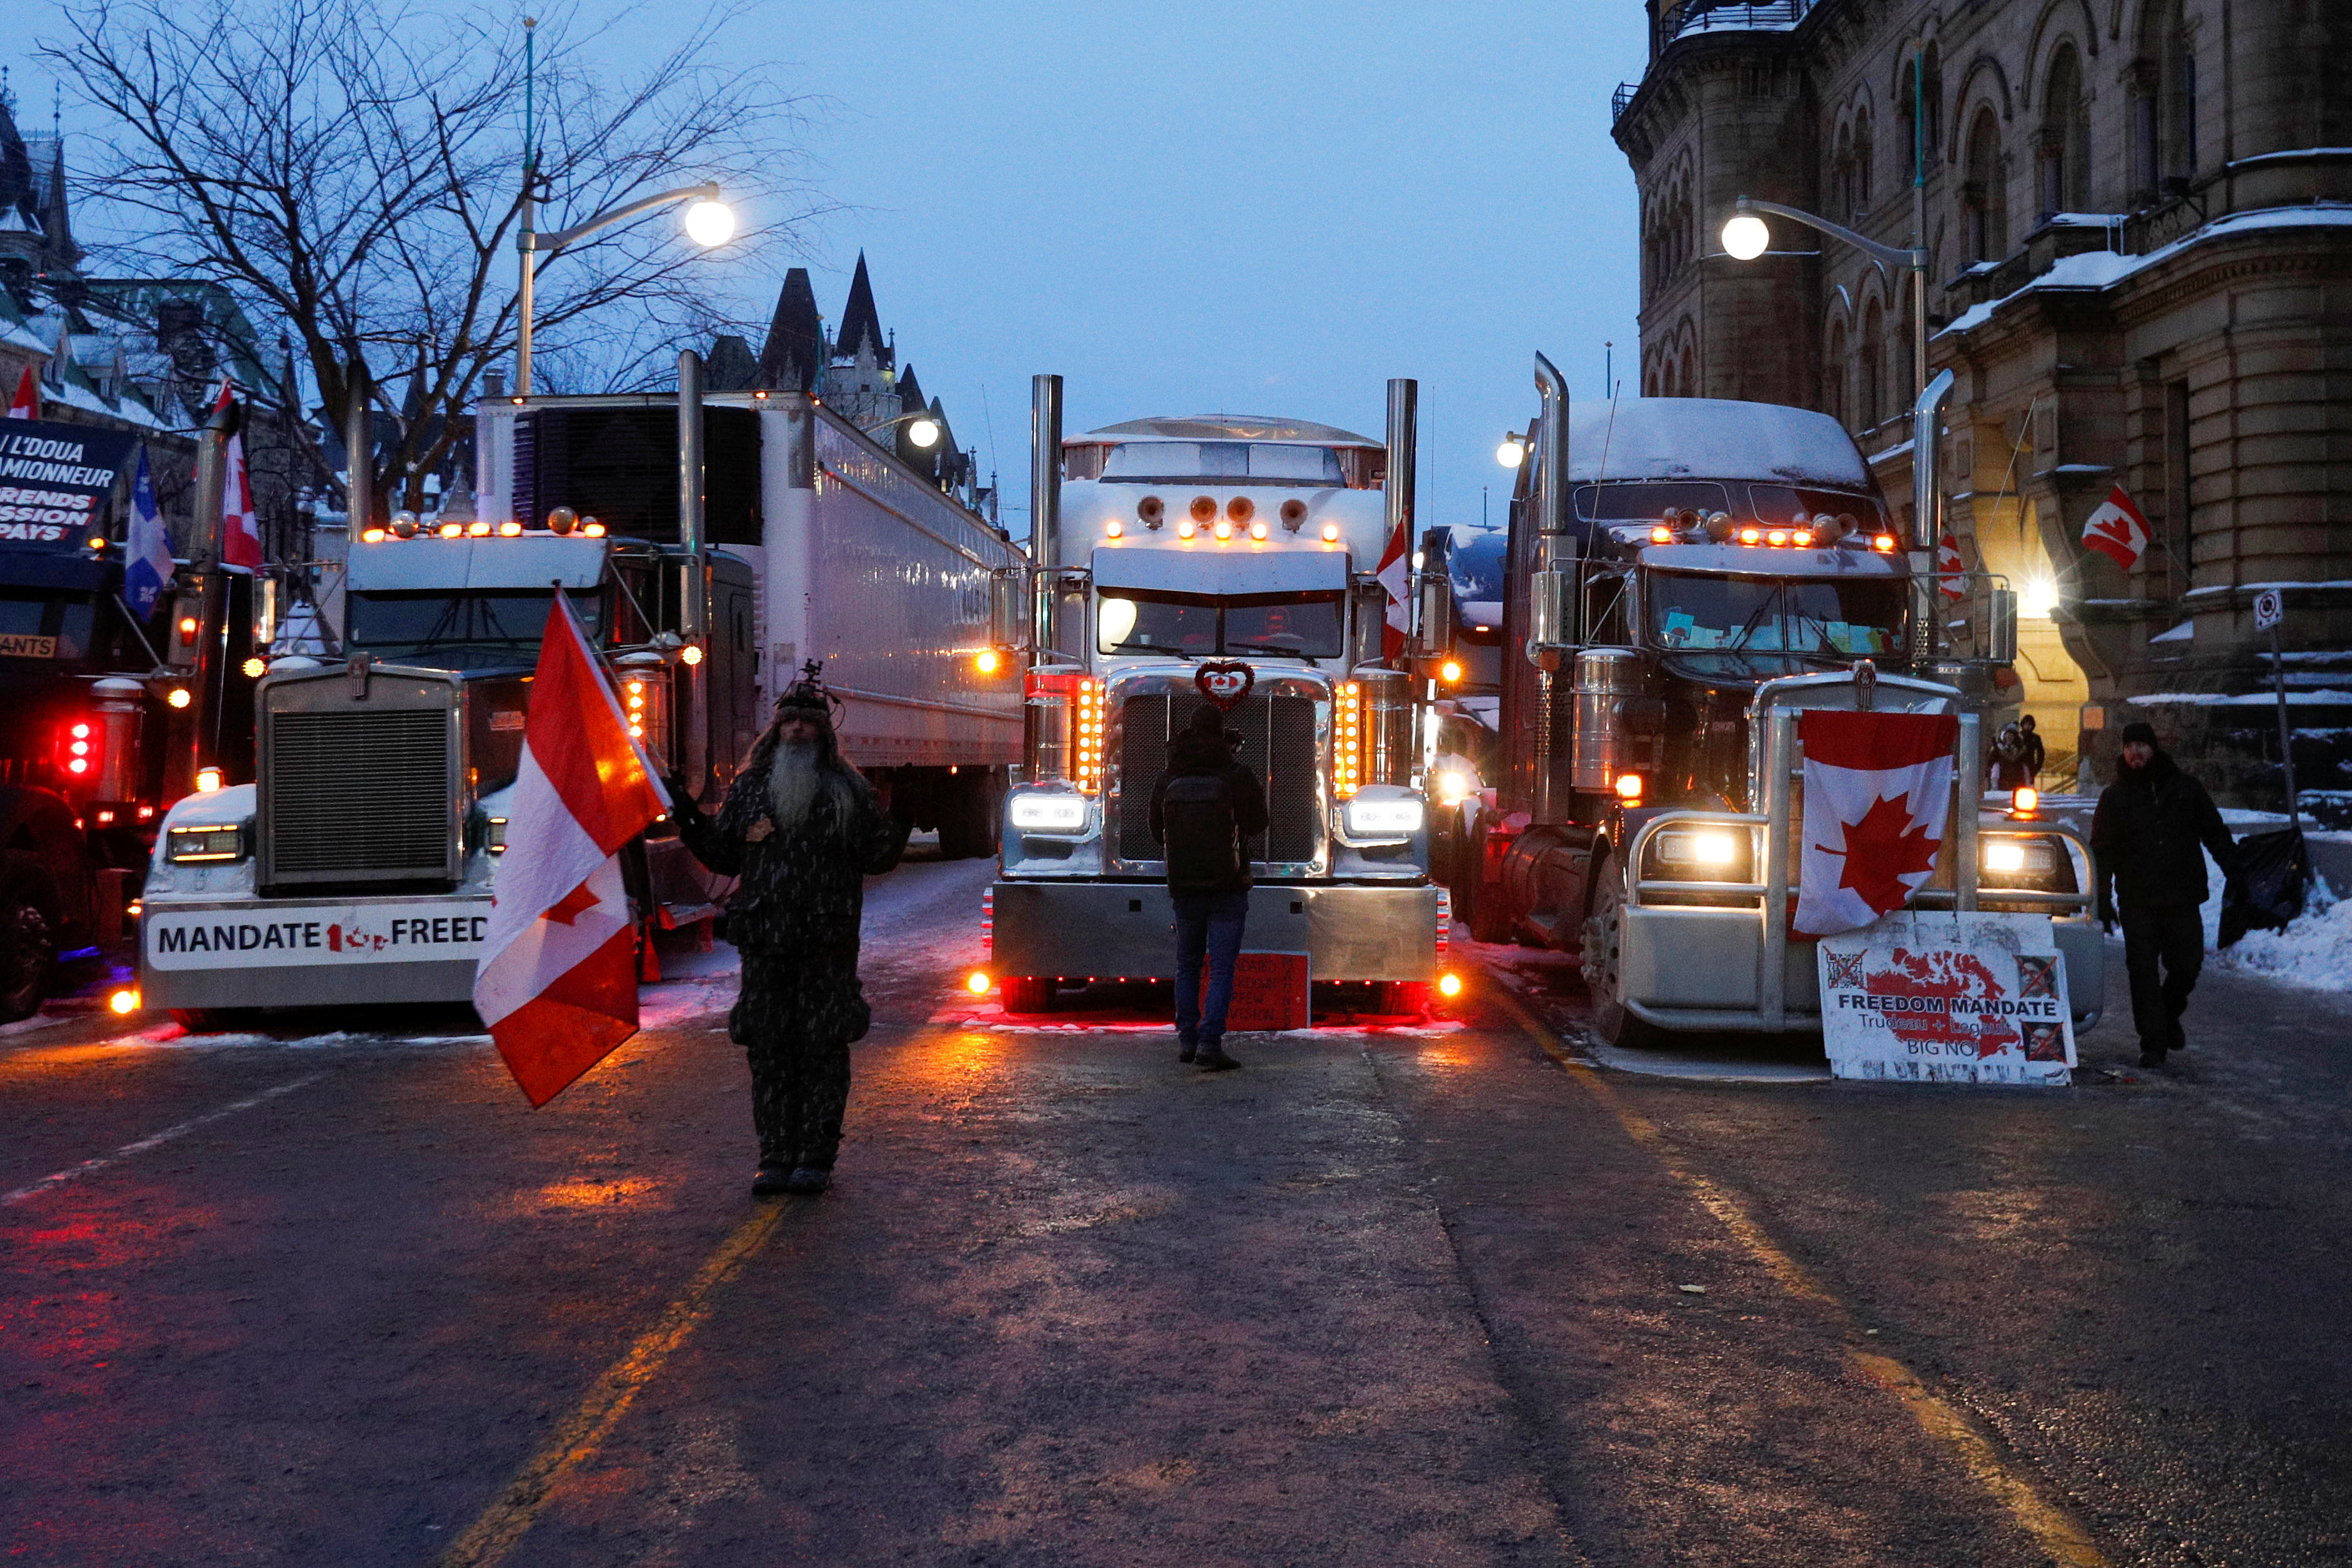 A protester stands near trucks across from Parliament Hill as truckers and supporters continue to protest coronavirus disease (COVID-19) vaccine mandates, in Ottawa, Ontario, Canada, February 4, 2022. REUTERS/Lars Hagberg